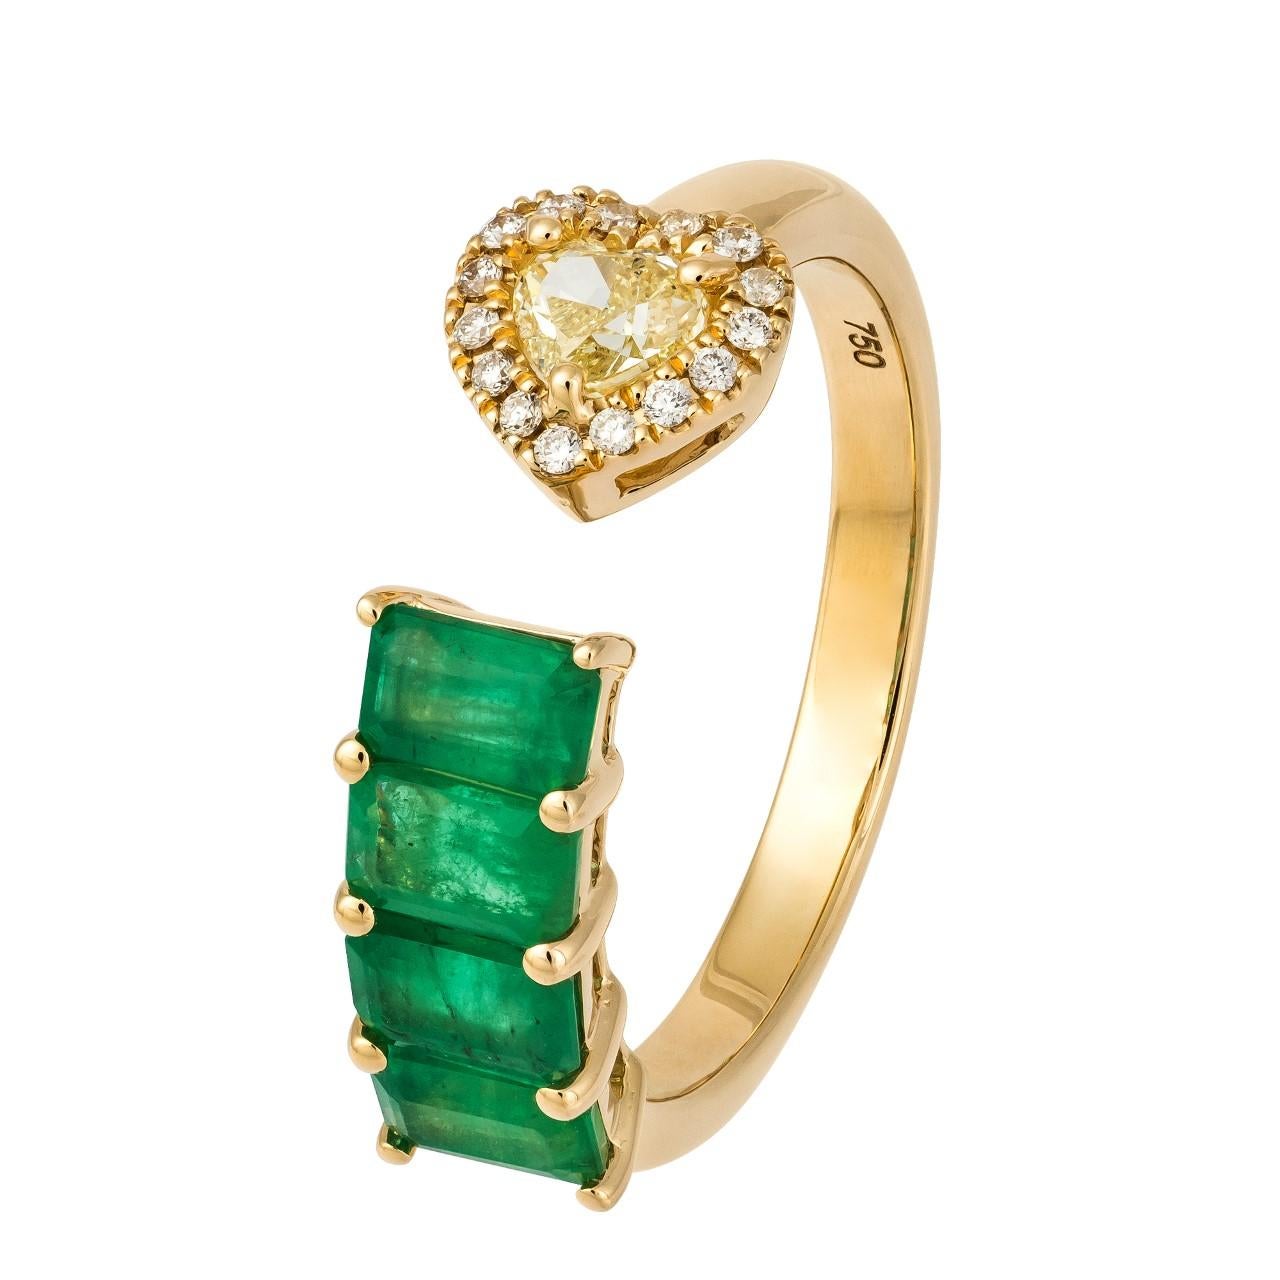 Antique Cushion Cut Fine Jewellery Fashion Emerald Yellow Diamonds Yellow 18K Gold Ring for Her For Sale